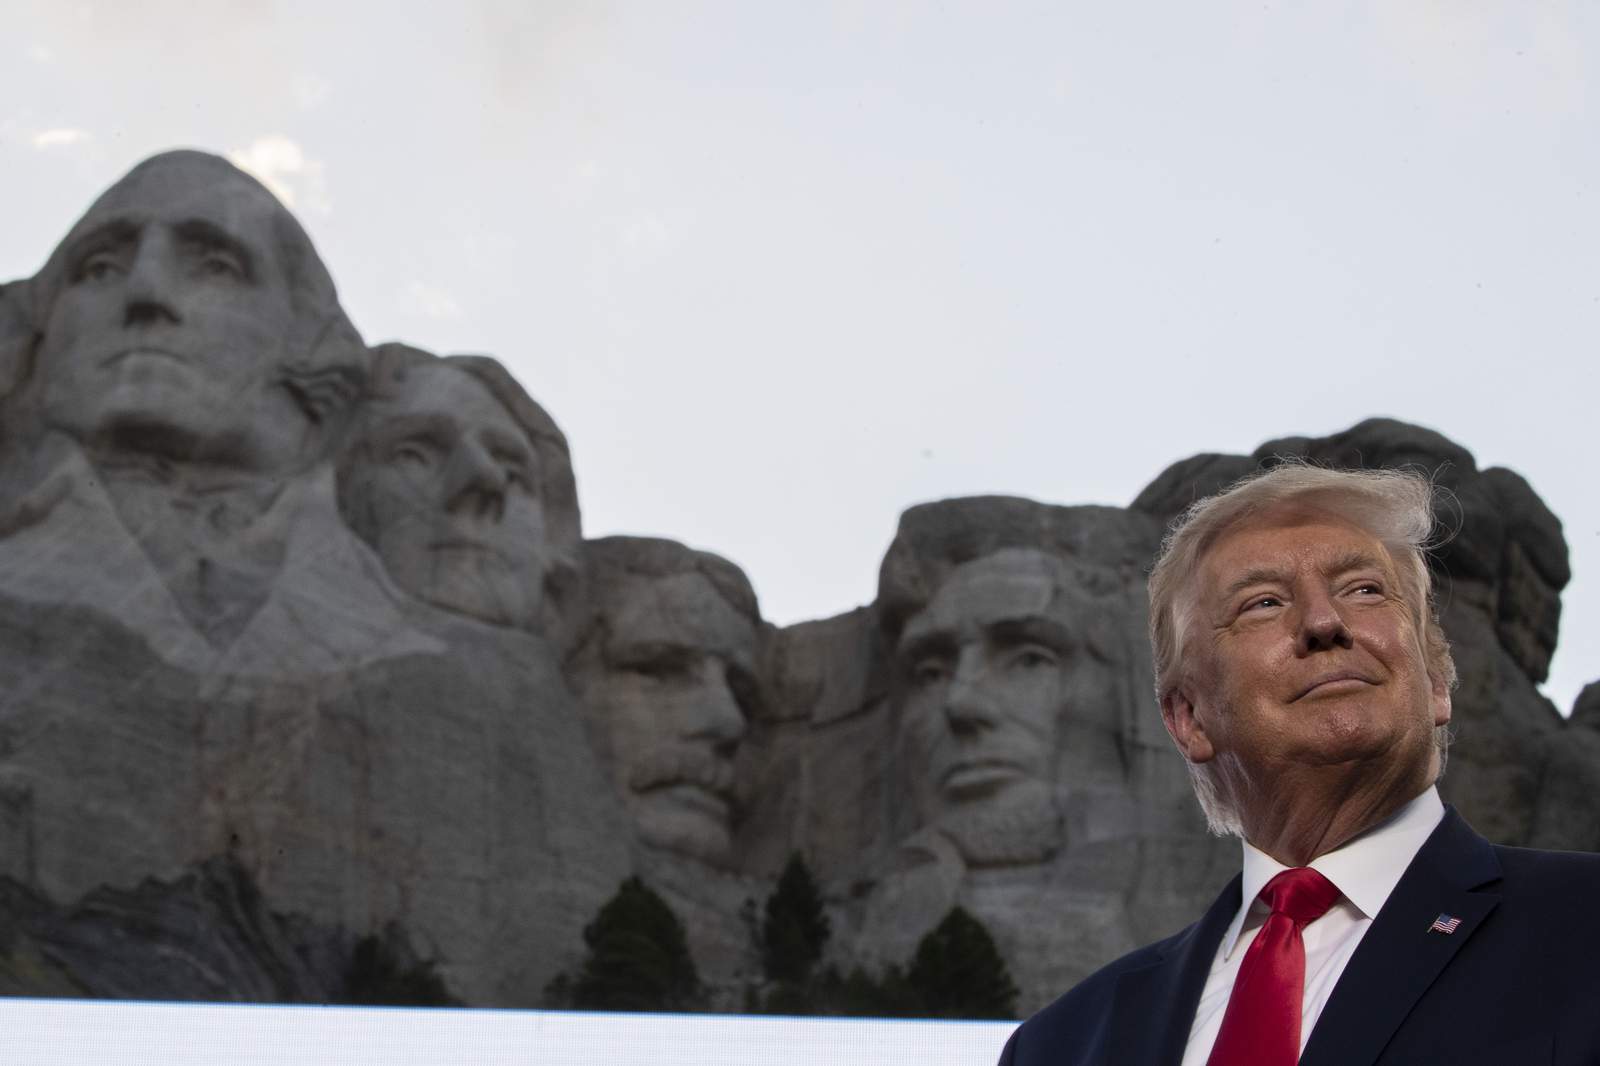 Report: Presidents aides asked South Dakotas governor about adding Trump on Mount Rushmore